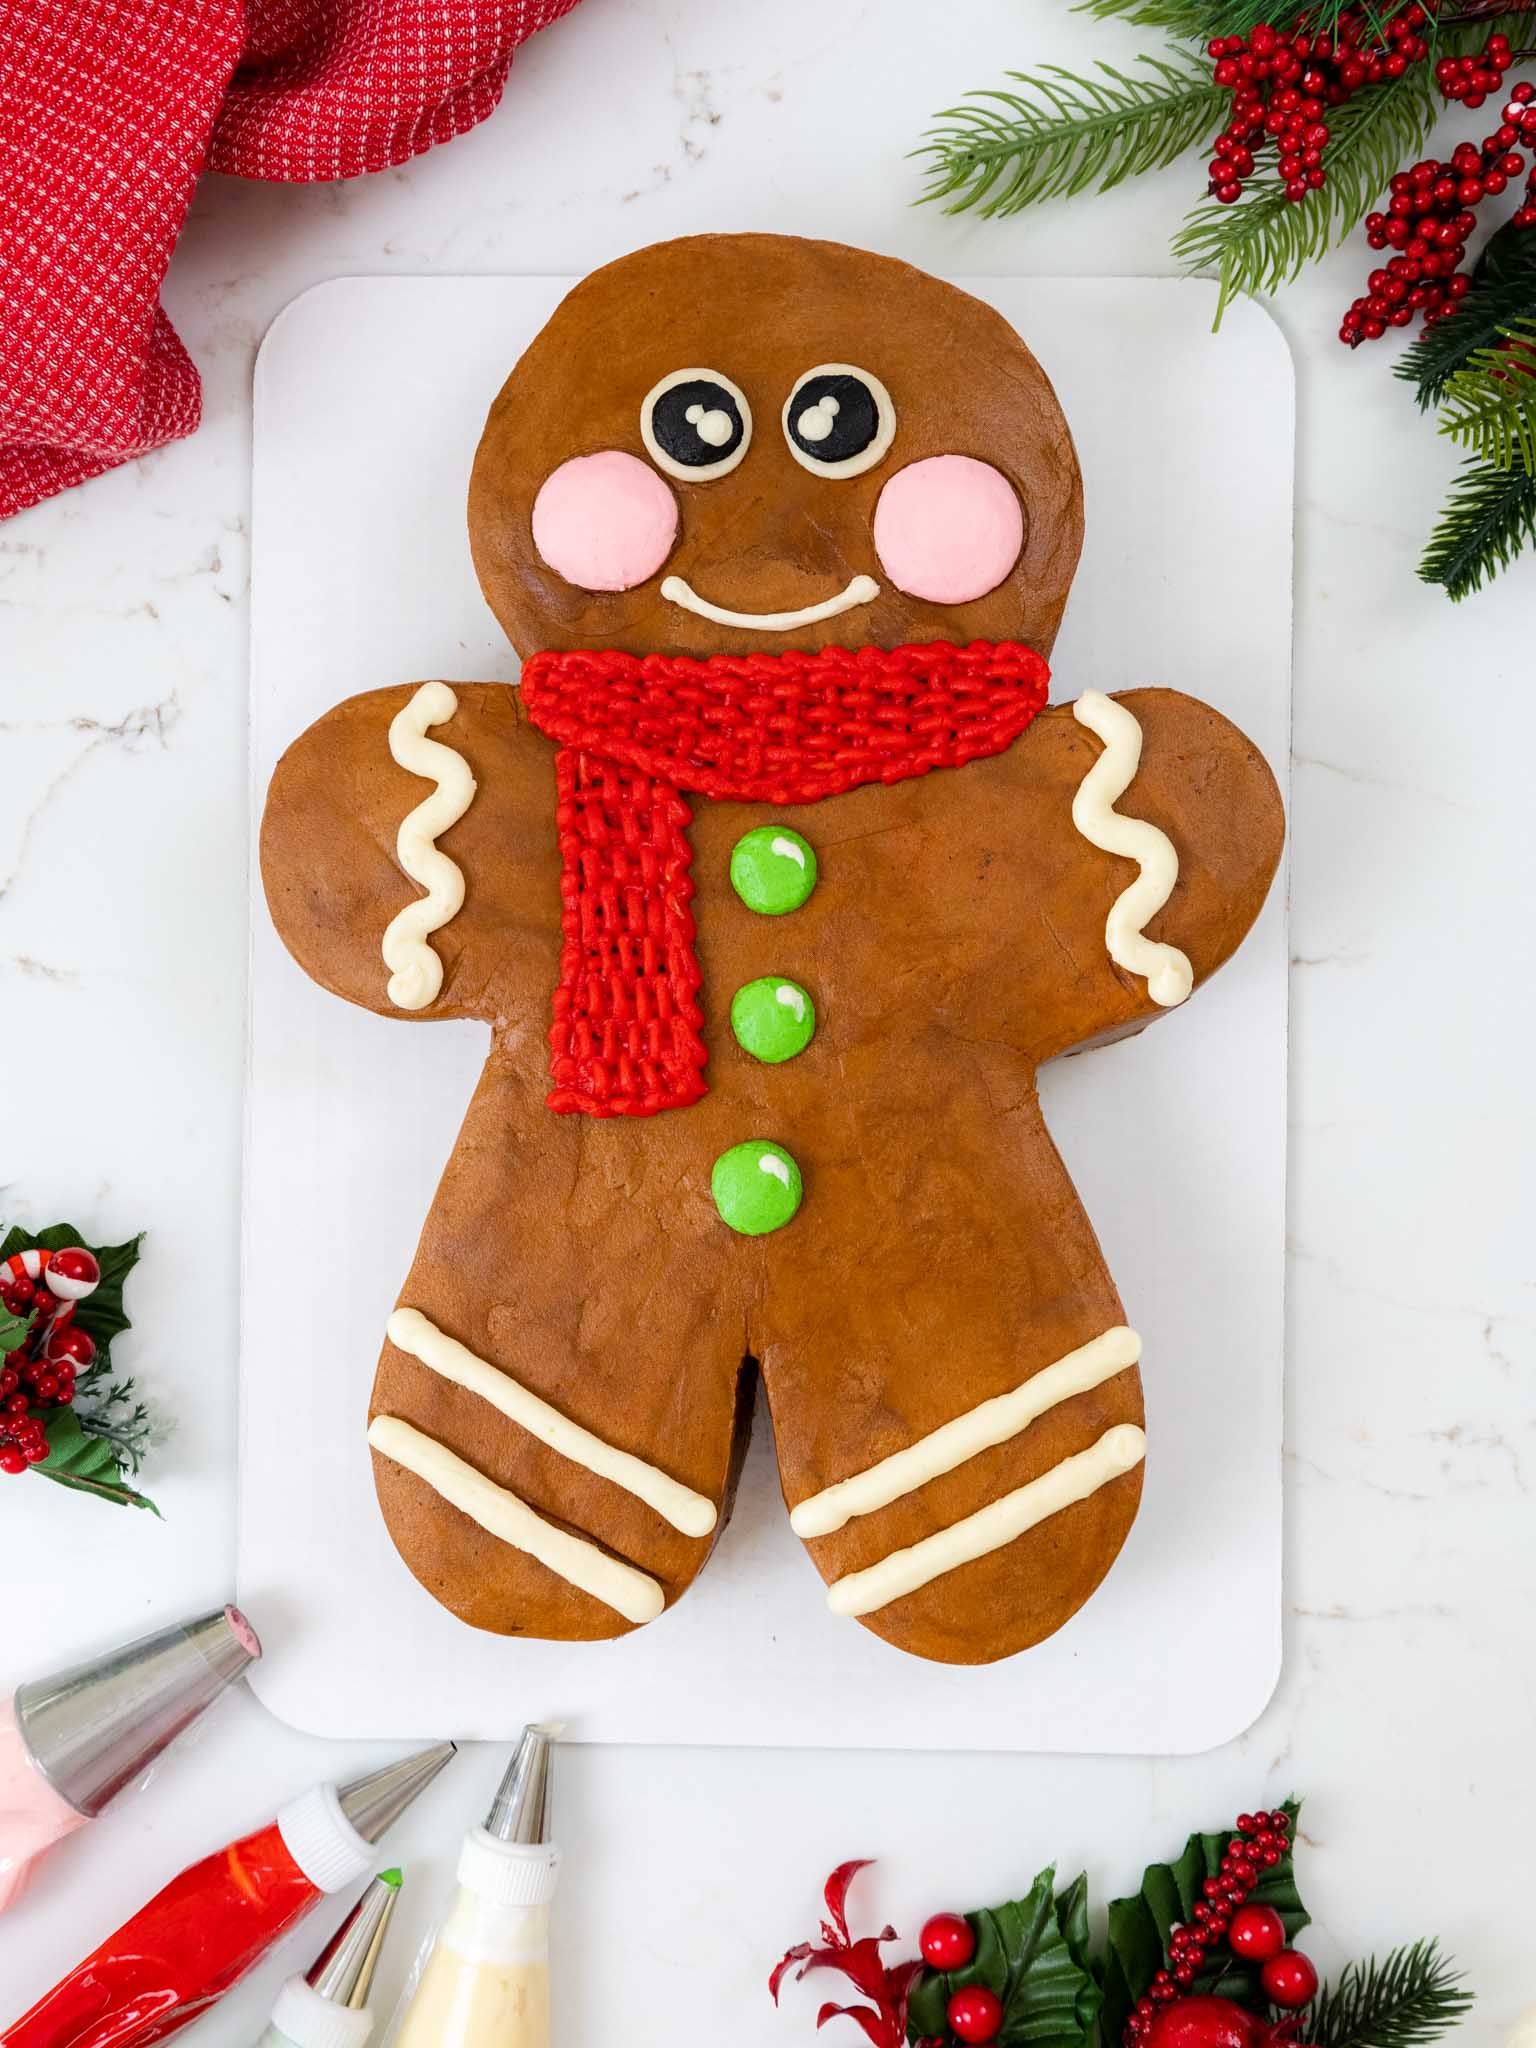 image of a gingerbread man cake that's been frosted with gingerbread buttercream frosting